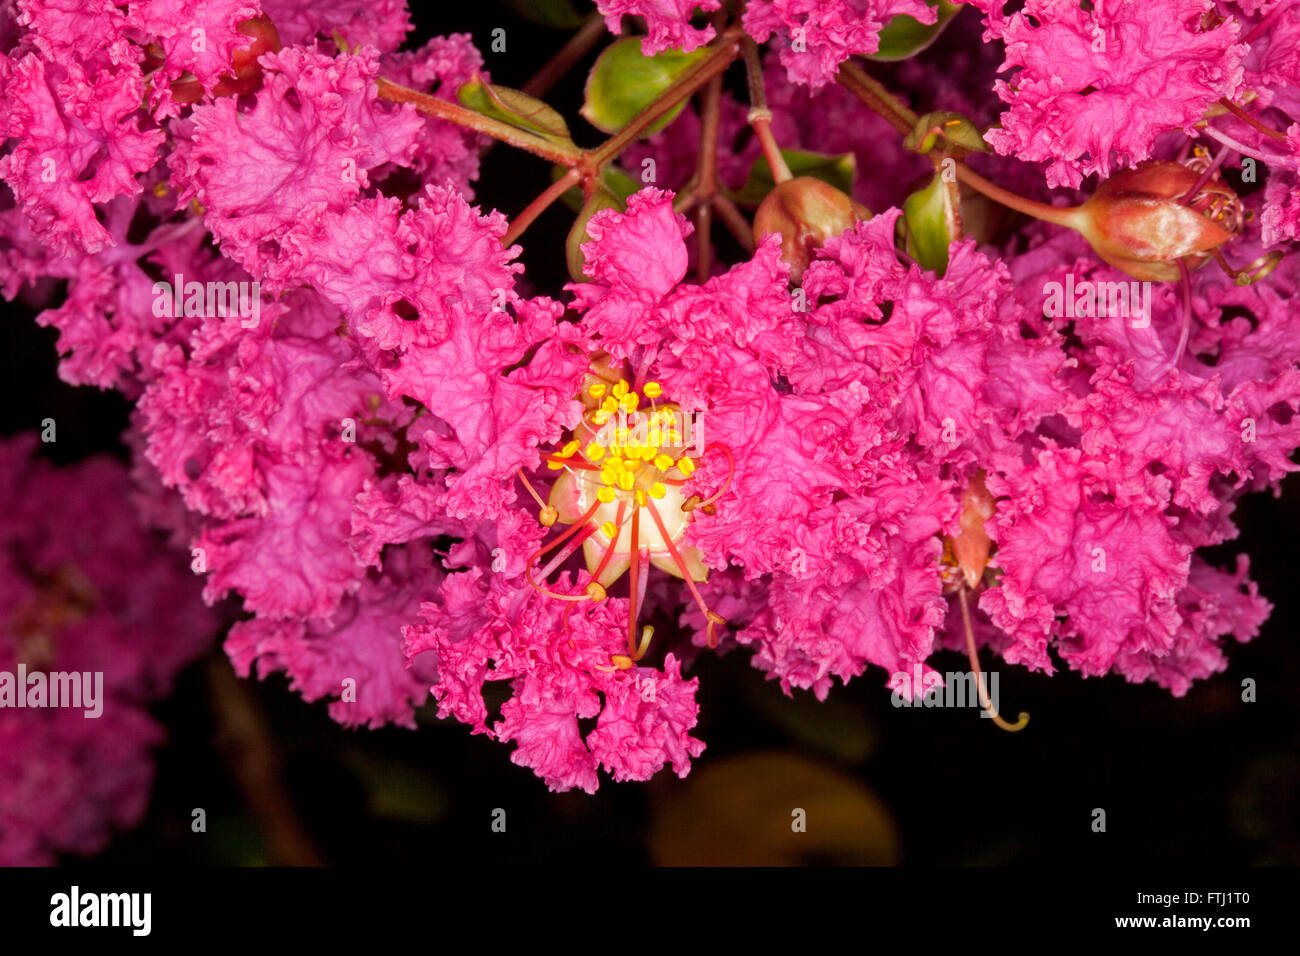 Large cluster of deep pink / red flowers of Lagerstroemia indica, crepe myrtle, pride of India, deciduous shrub on dark background Stock Photo